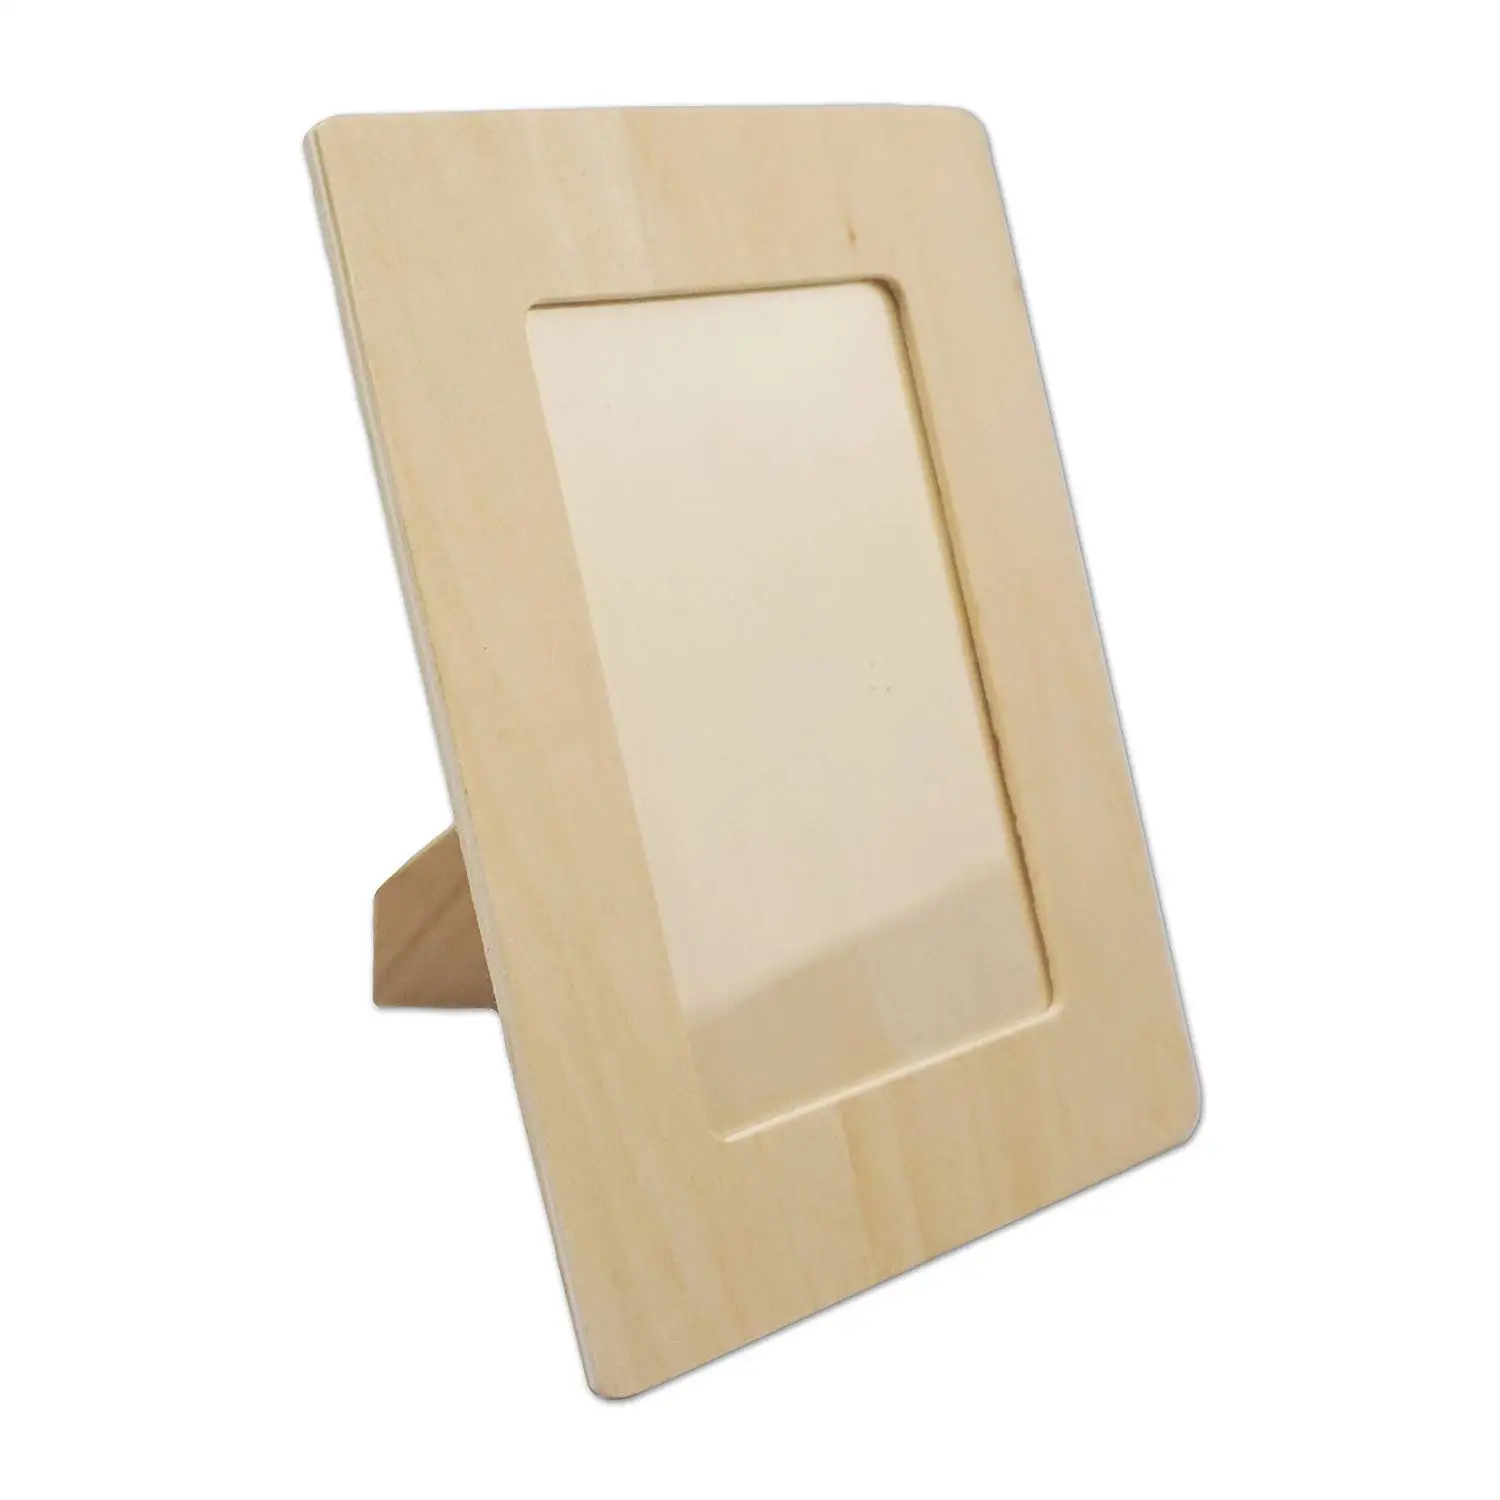 Plywood Carved Wooden Picture Photo Frame - Buy Wooden Photo Frame ...